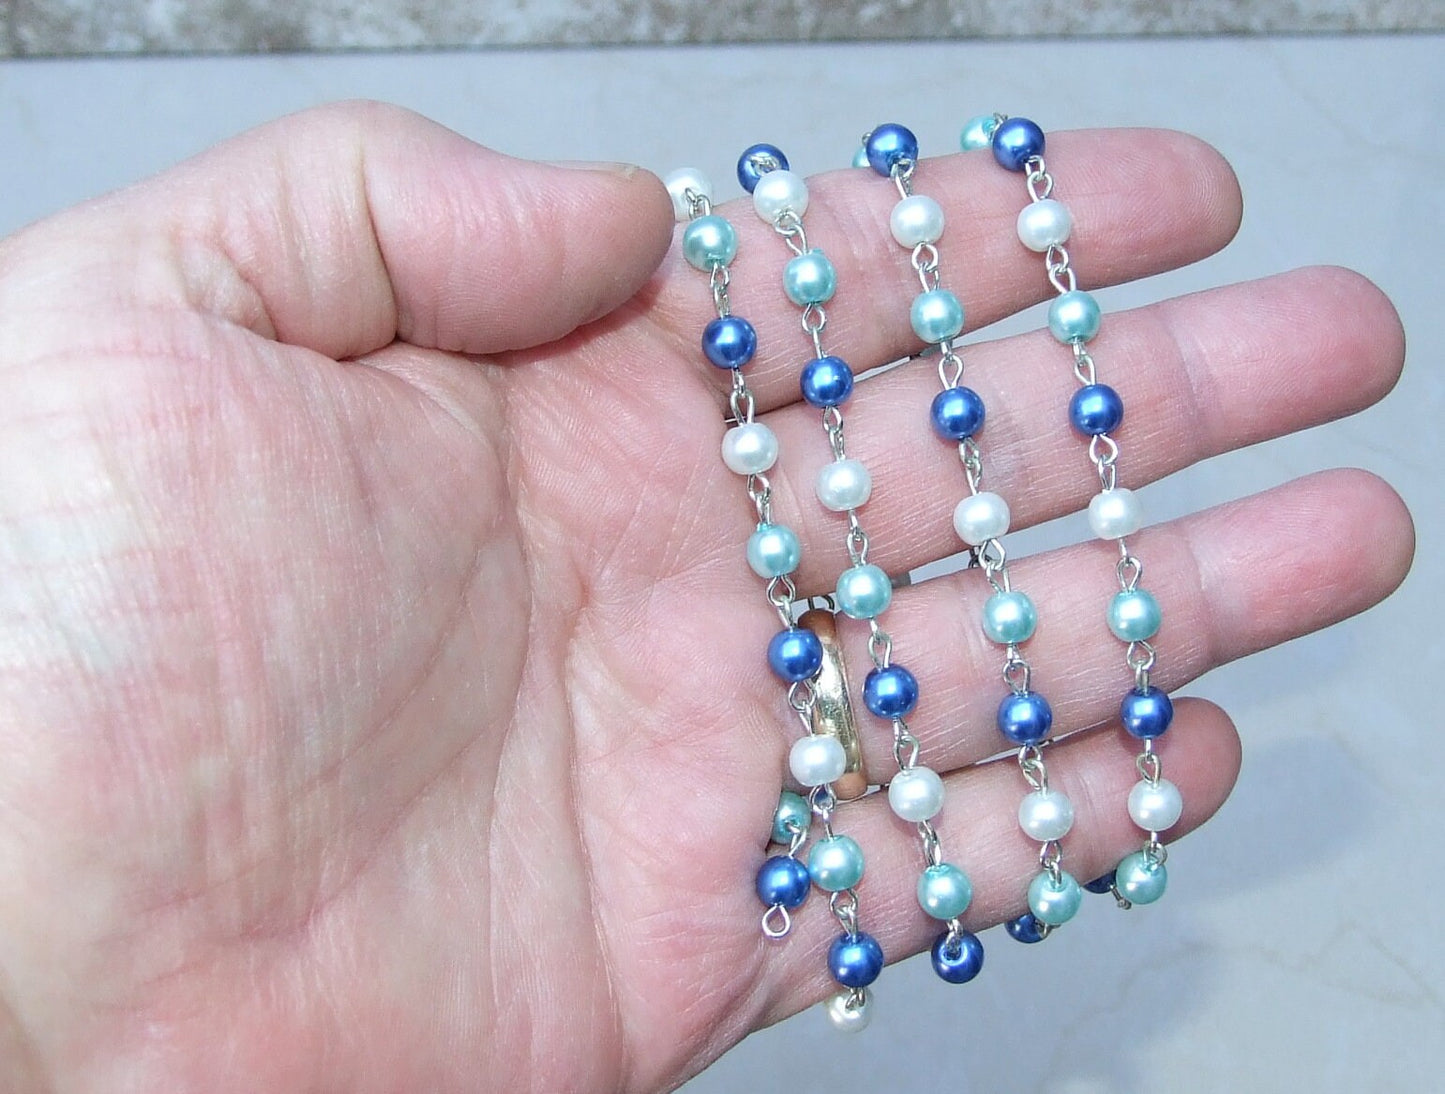 White & Blue Pearl Rosary Chain, 1 Meter, Glass Beads, Beaded Chain, Body Chain Jewelry, Silver Chain, Necklace Chain, Belly Chain, 6mm, 303